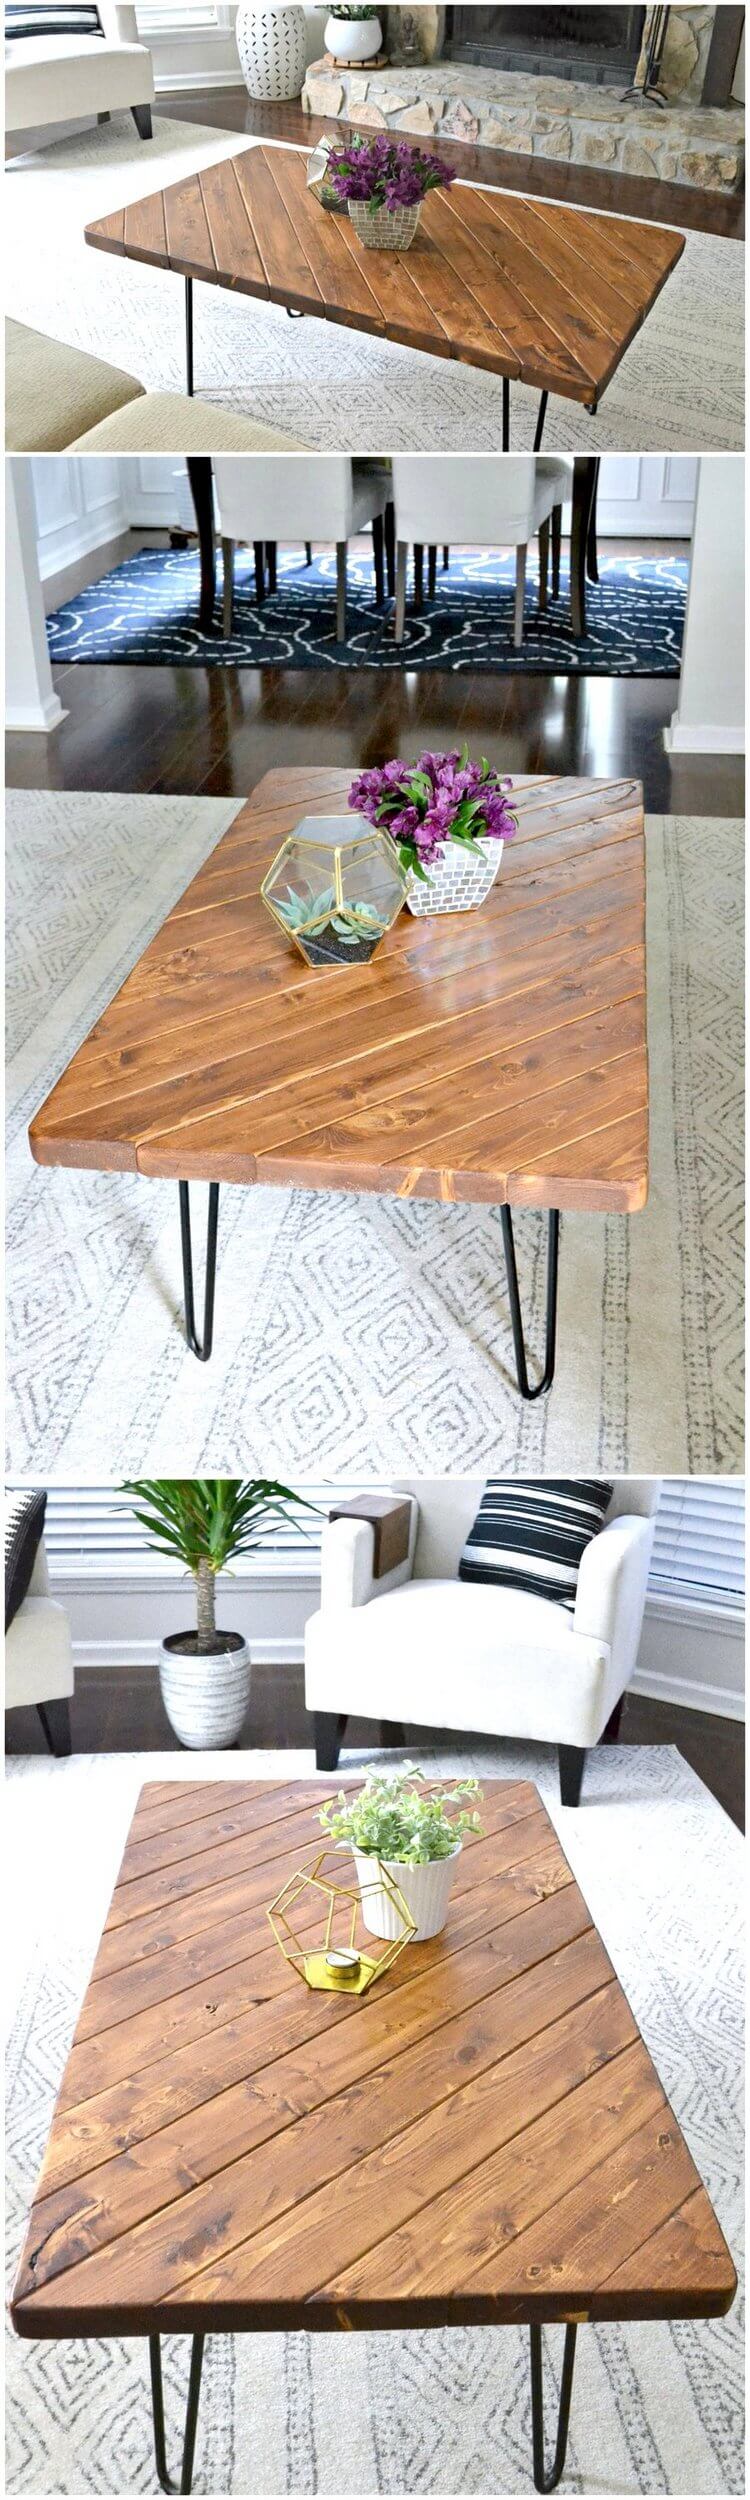 45 Rustic Coffee Tables and DIY Plans | Rustic Home Decor and Design Ideas.